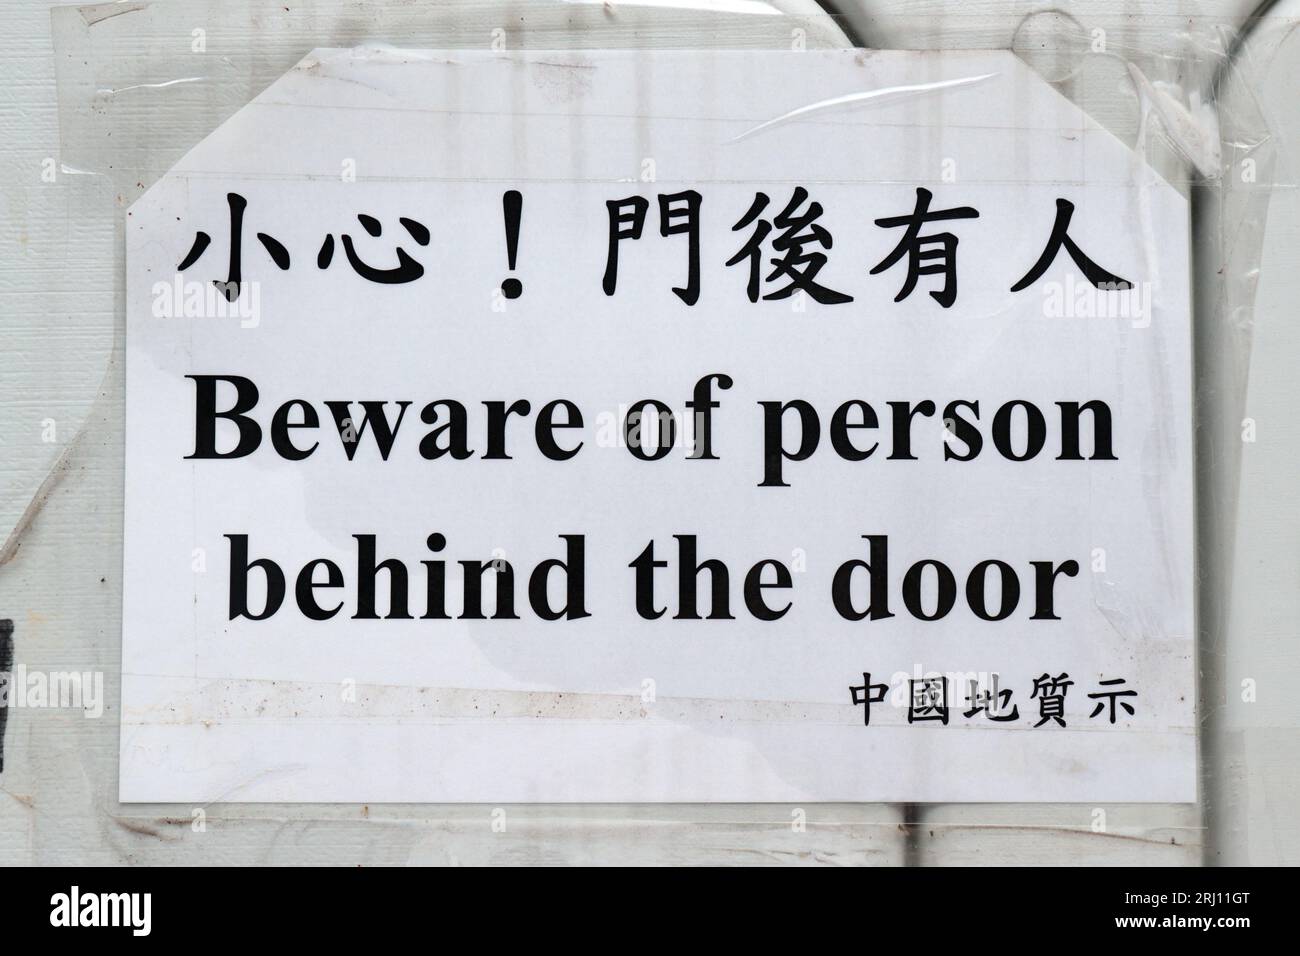 Bilingual Warning, 'Beware of person behind the door', sign at construction works at Caine Road Playground, mid-levels, Hong Kong Island,  20 Aug 2023 Stock Photo